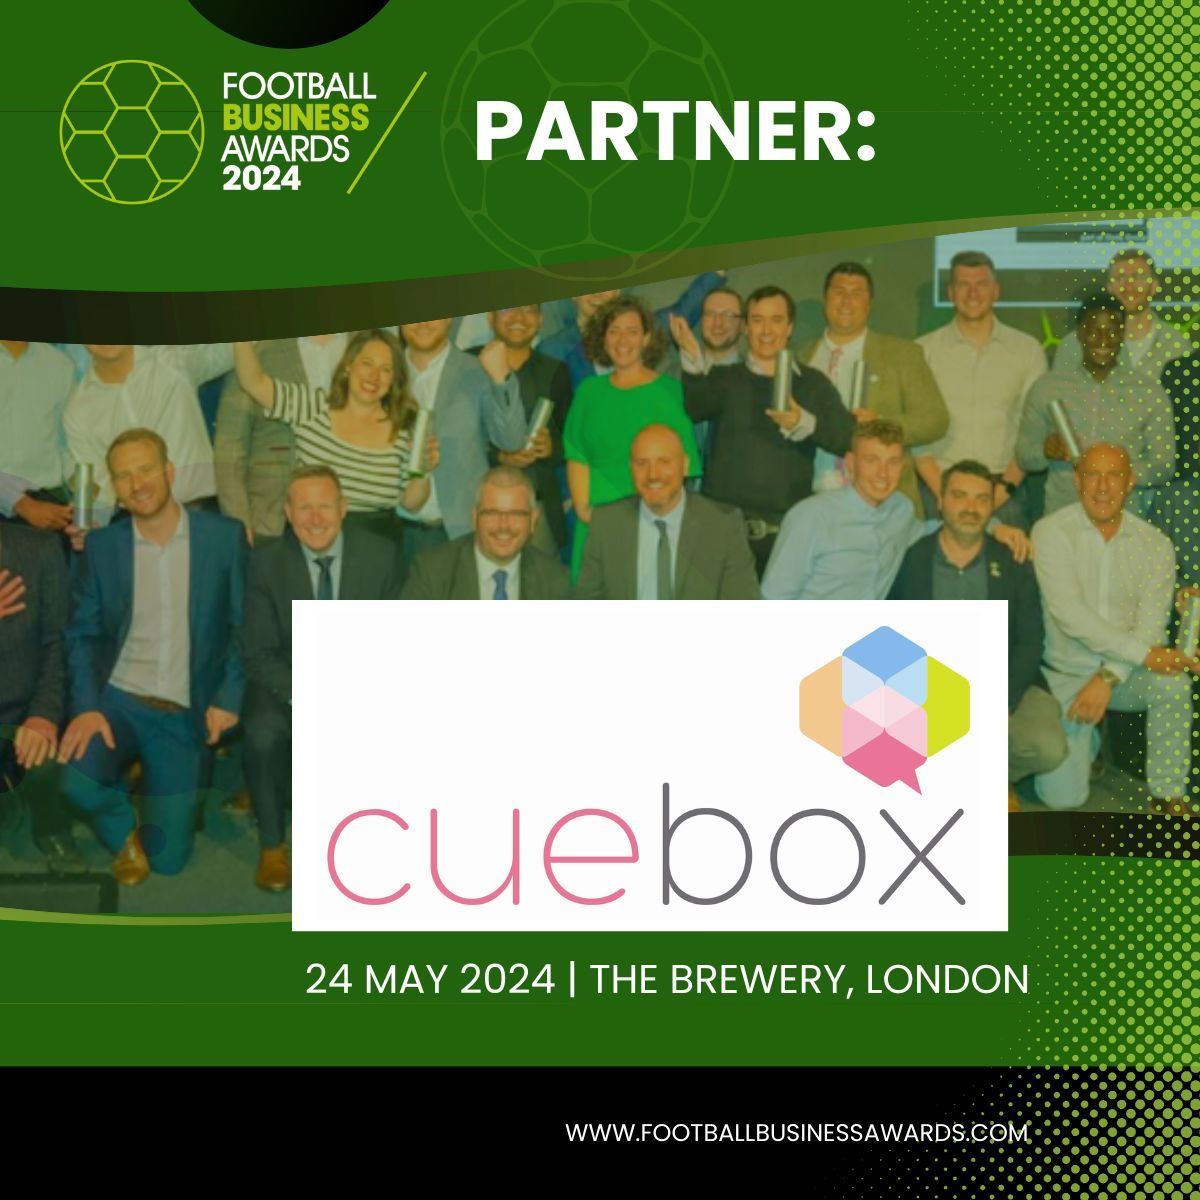 Delighted to welcome @cueboxprompting Partners at #FBA24 - studio and location prompting, it's always great to work with them. 
They'll be there on 24th May - why not join us? 
▶️ bit.ly/3xshIFH 
#FootballBusiness